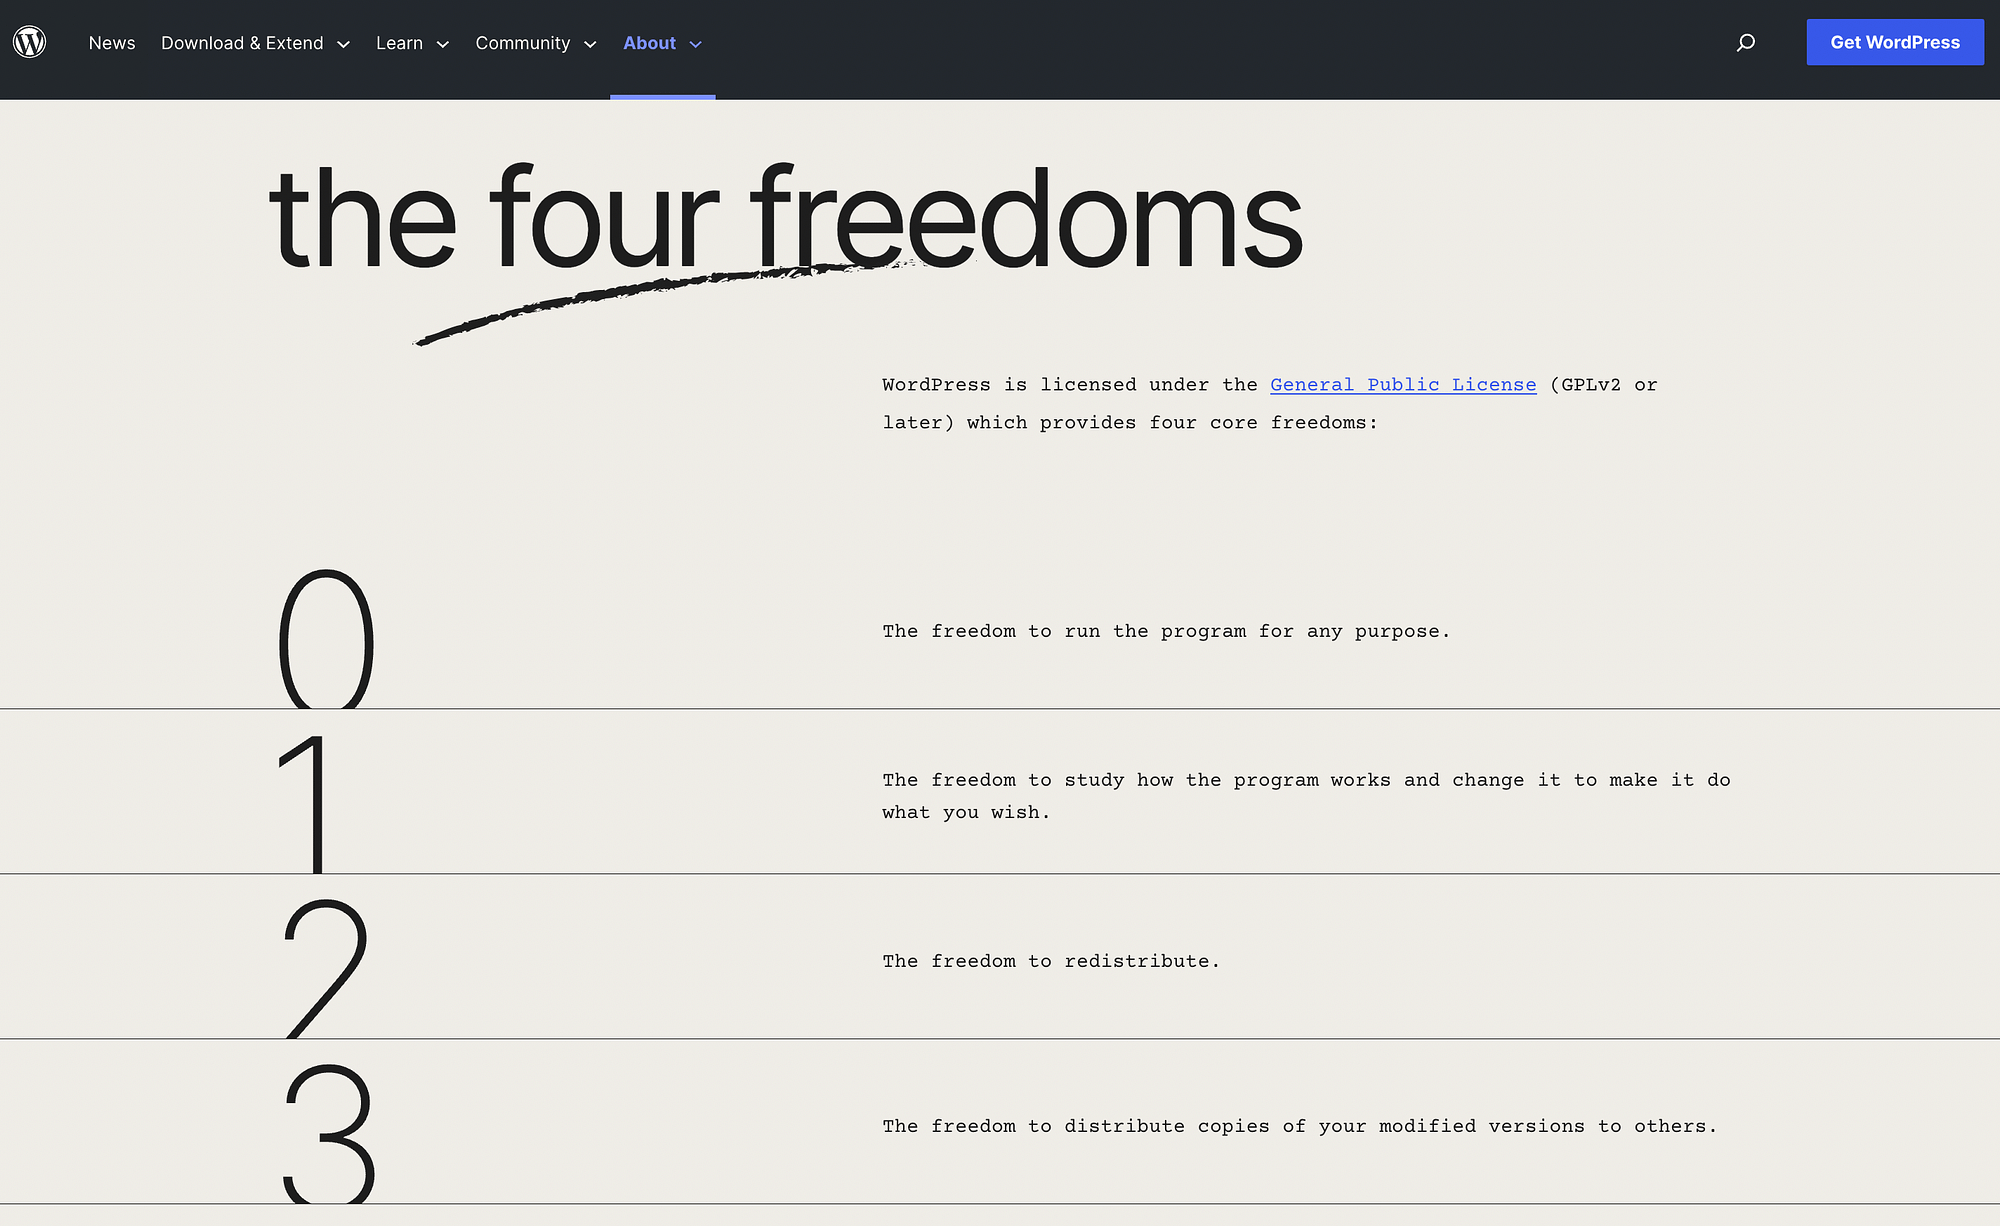 WordPress is open source, licensed under the GPL, which gives the right to the four freedoms.